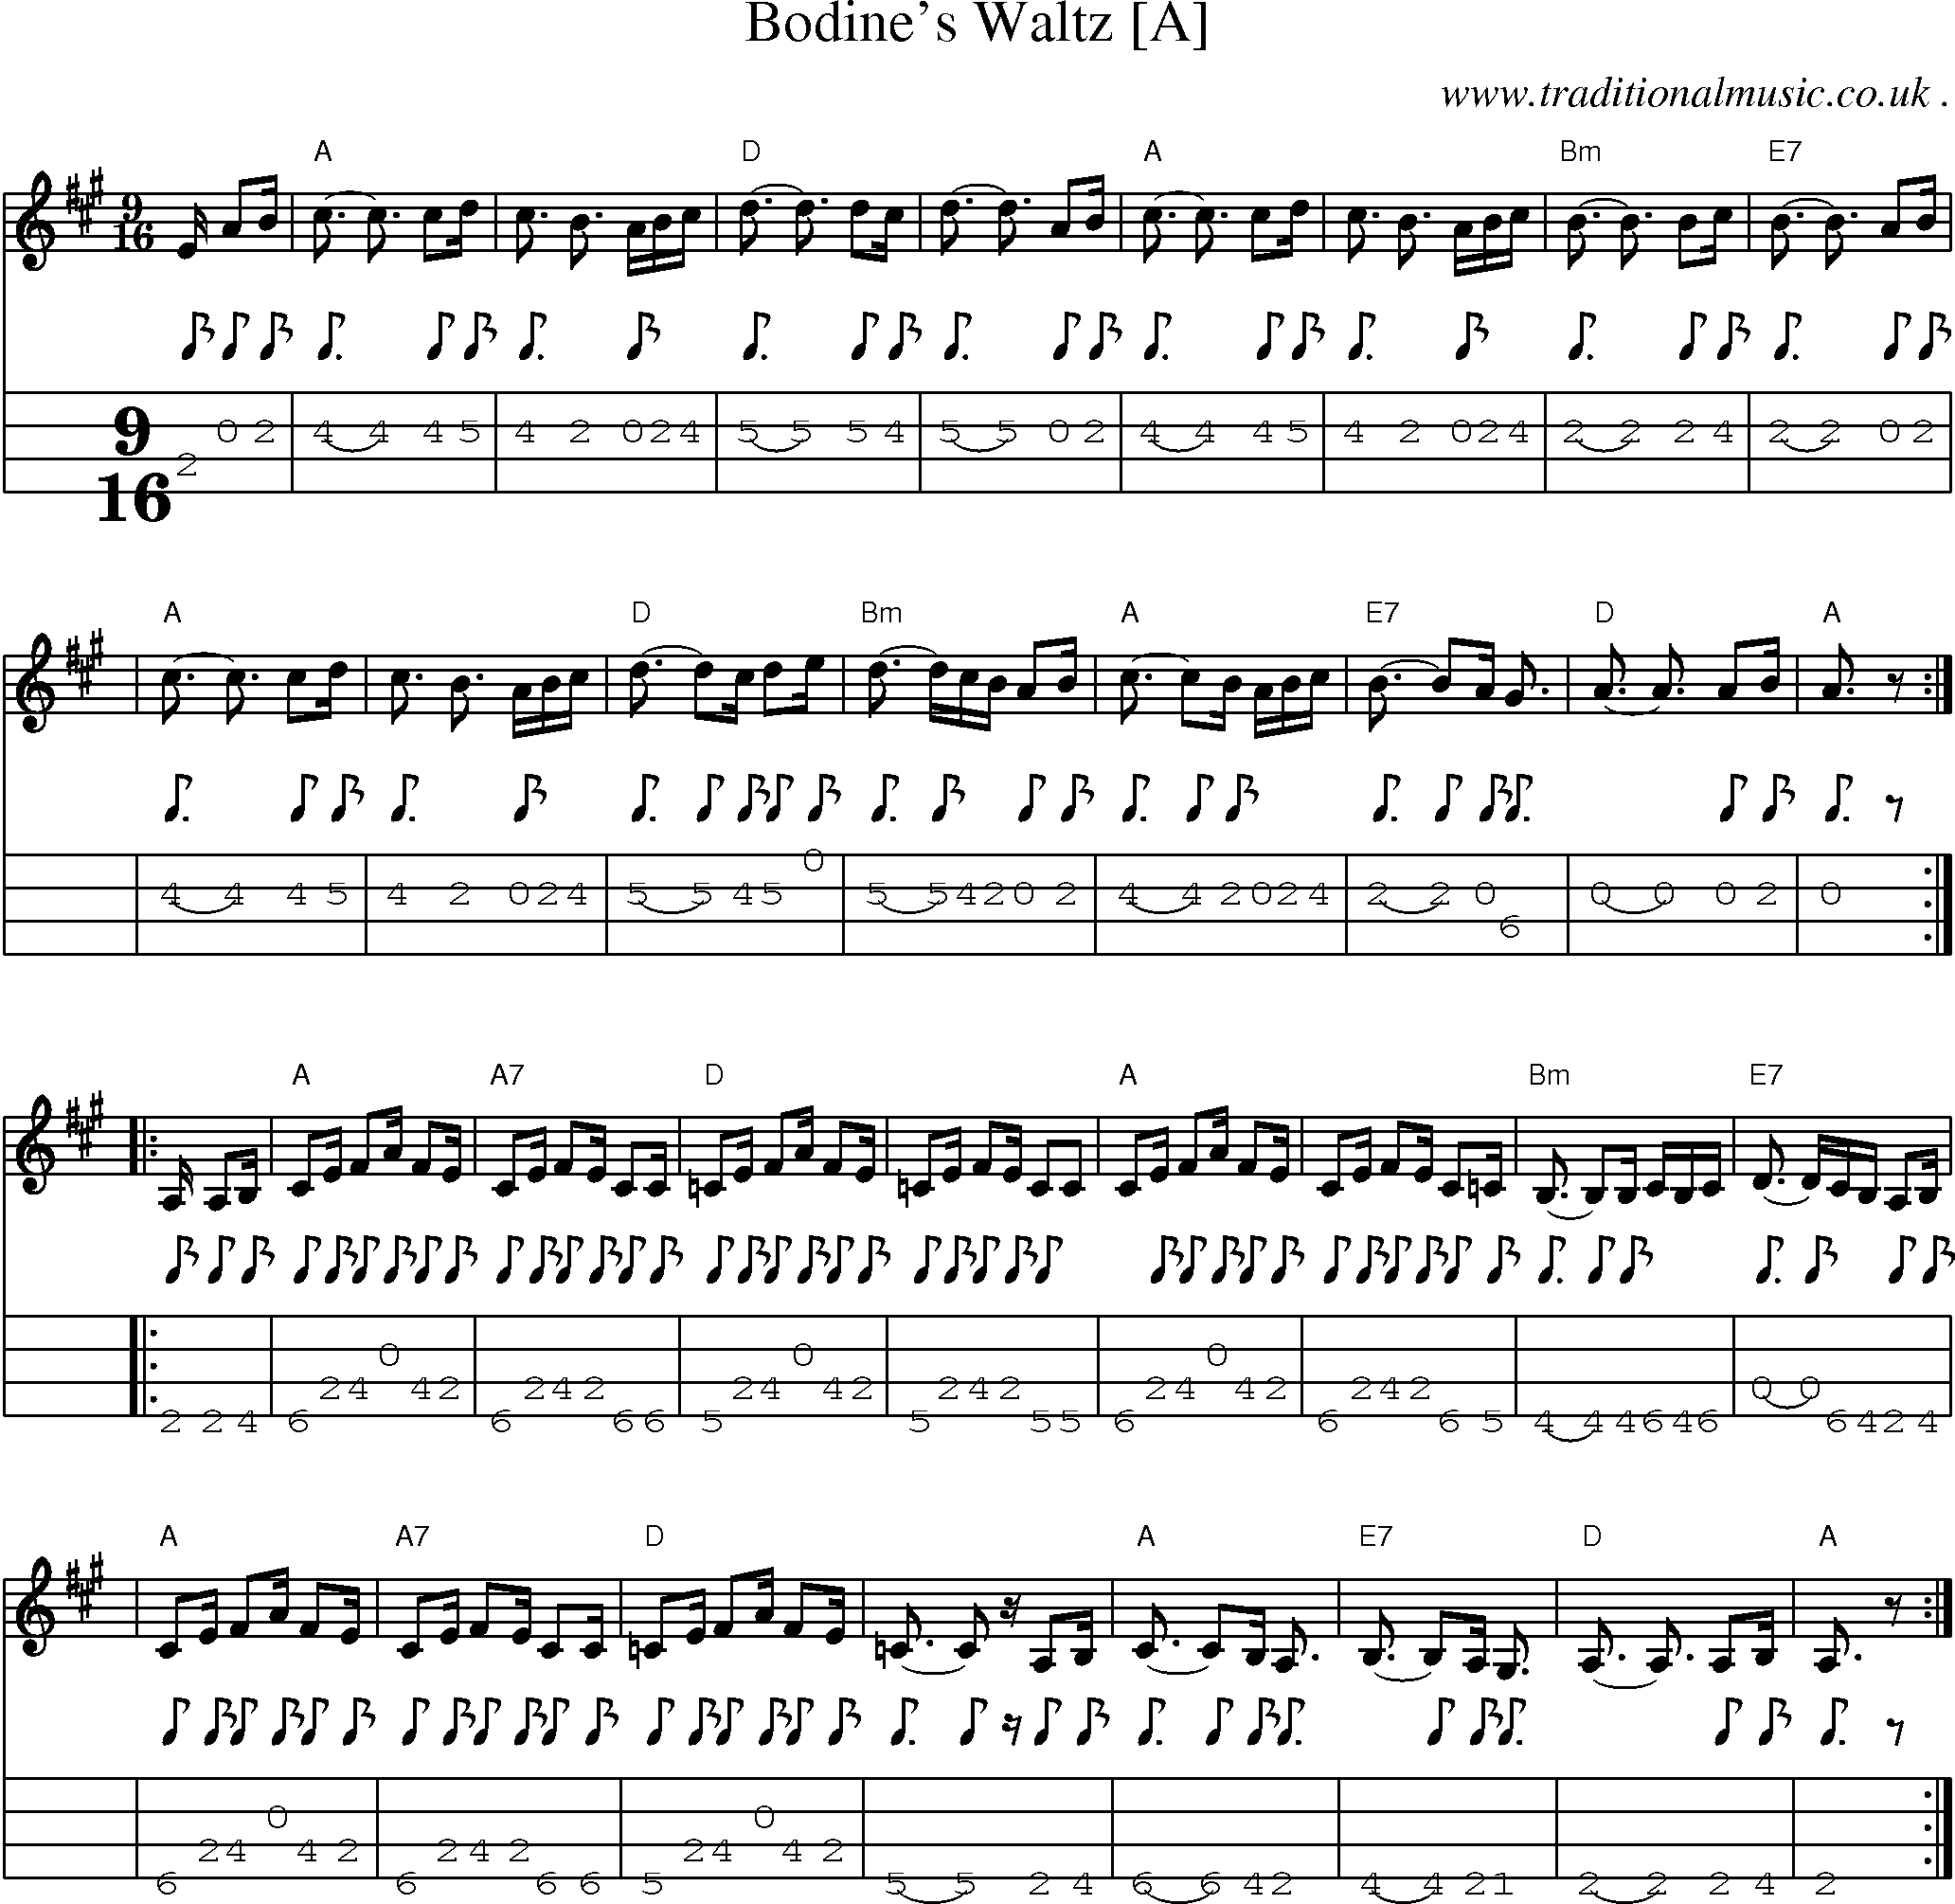 Music Score and Mandolin Tabs for Bodines Waltz [a]